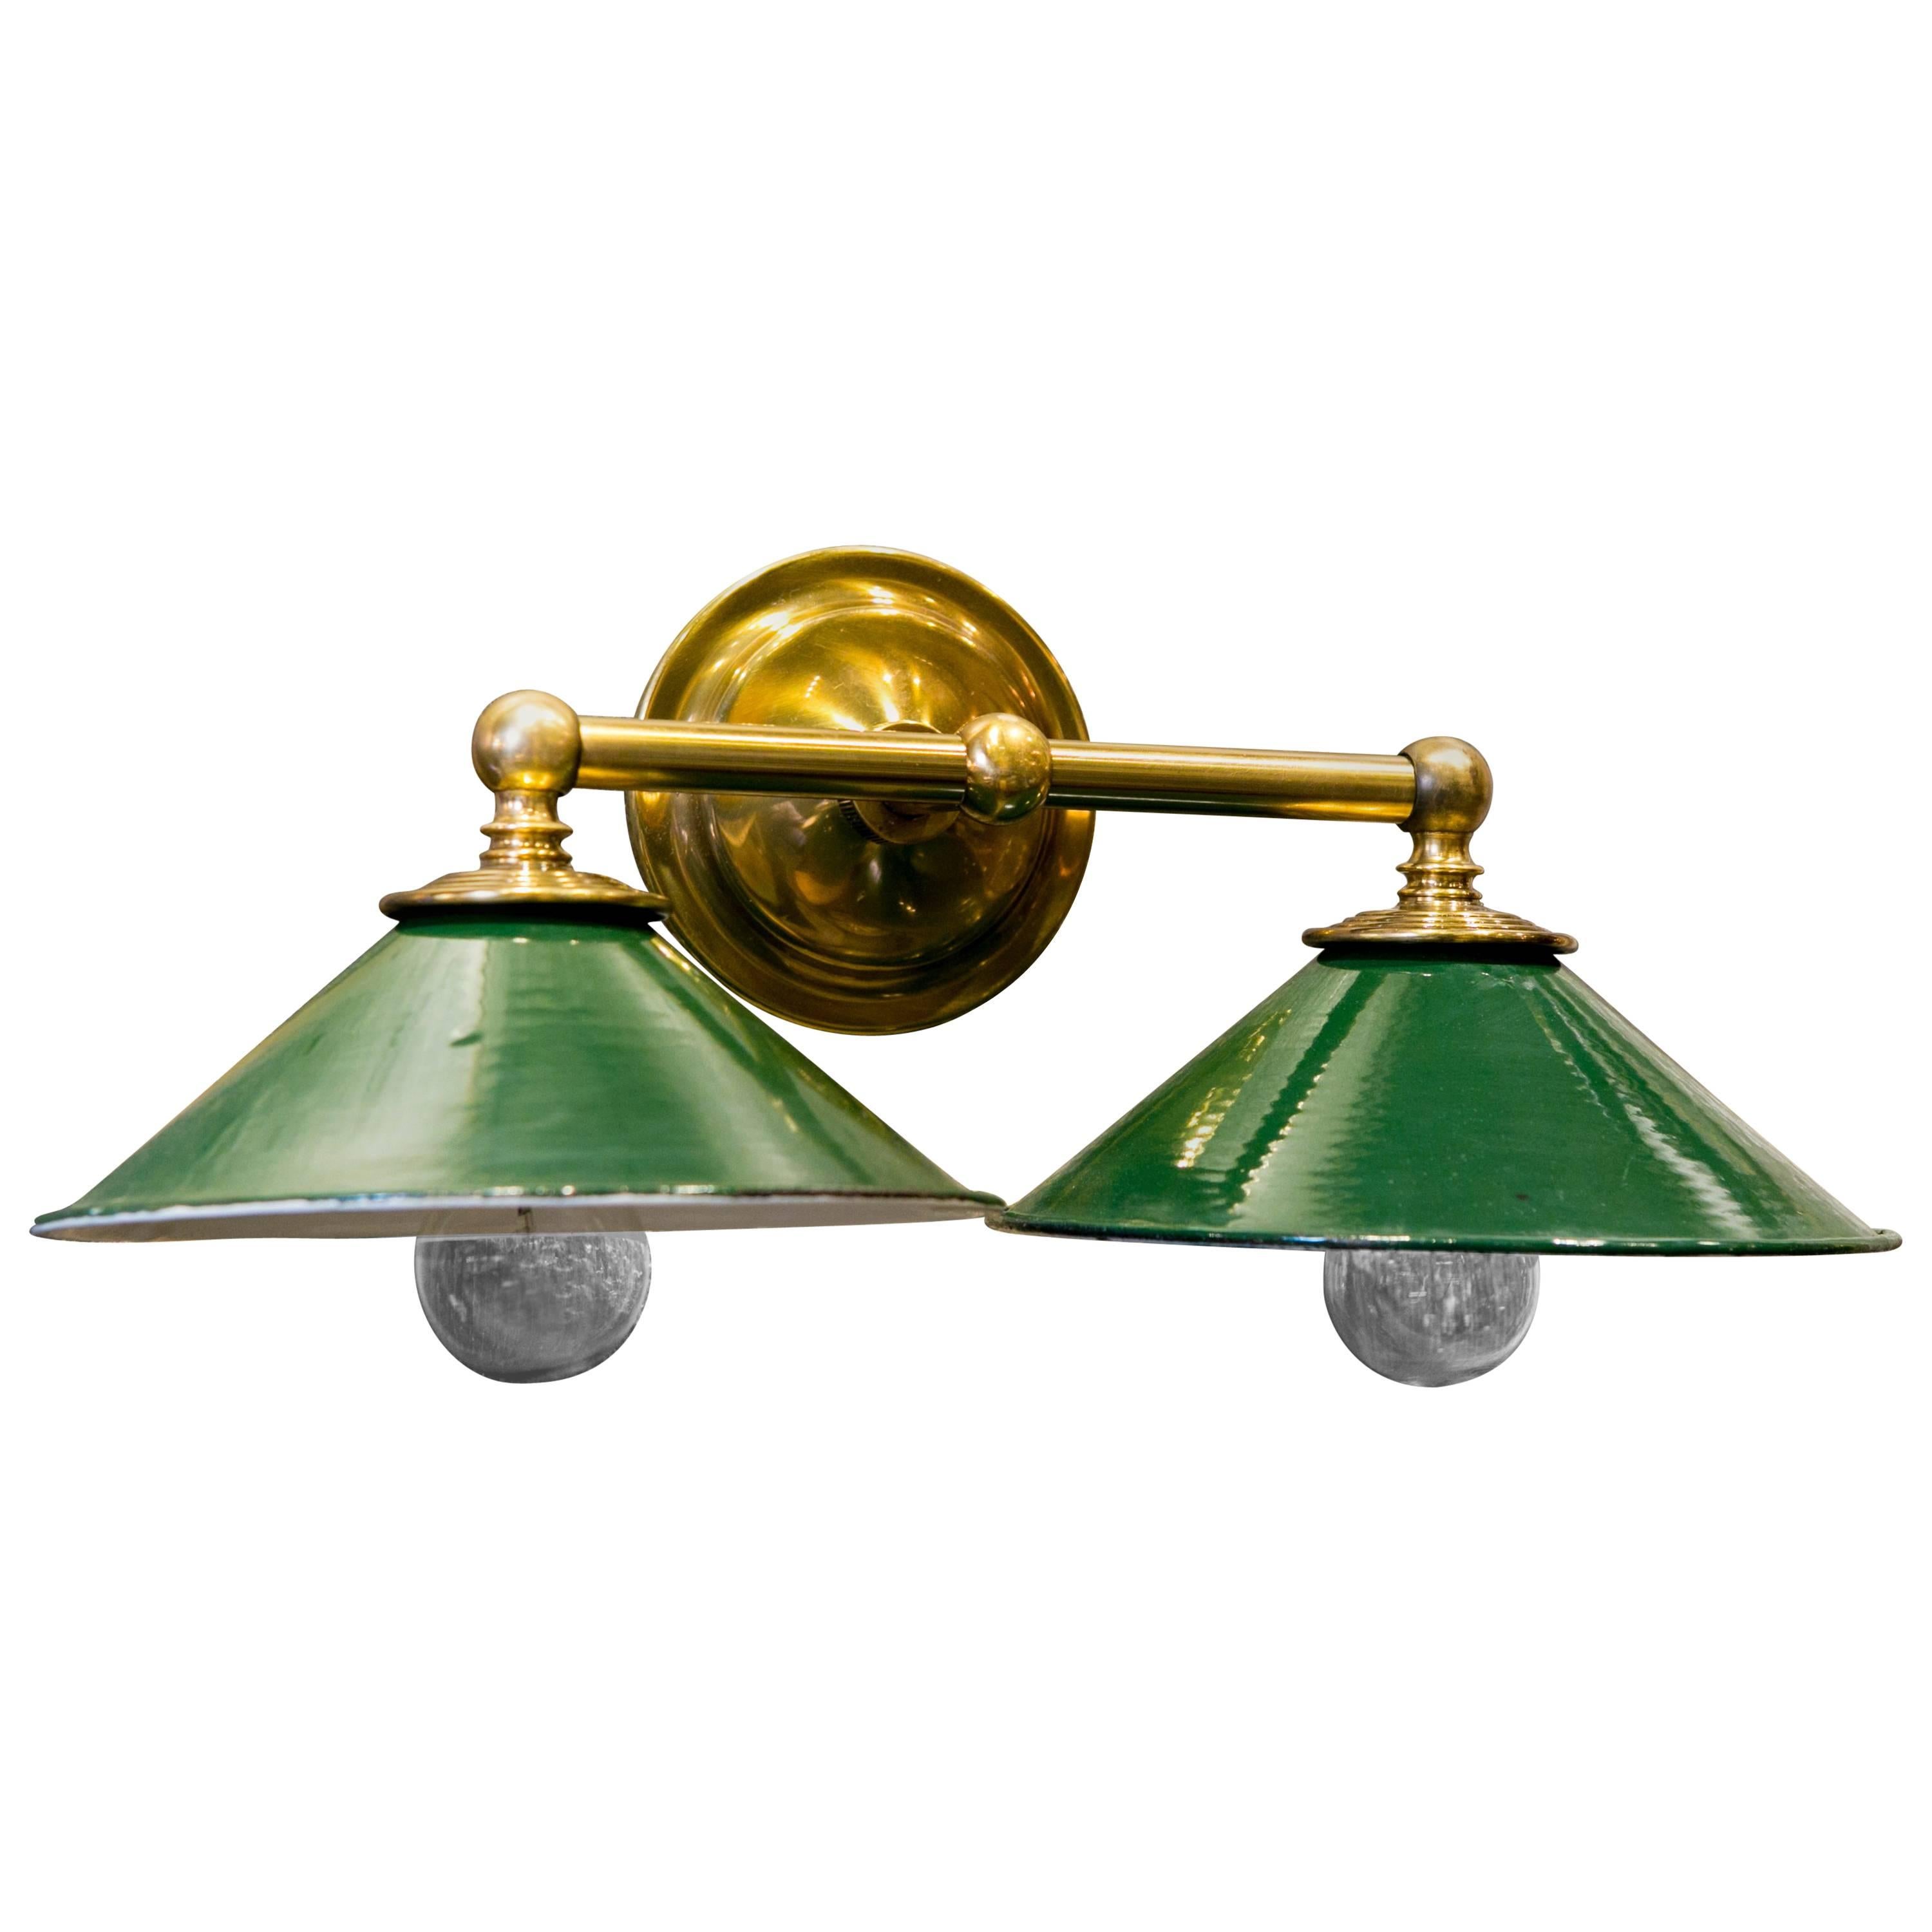 Brass Wall Sconce with Green Enamel Downward Facing Shades, circa 1920